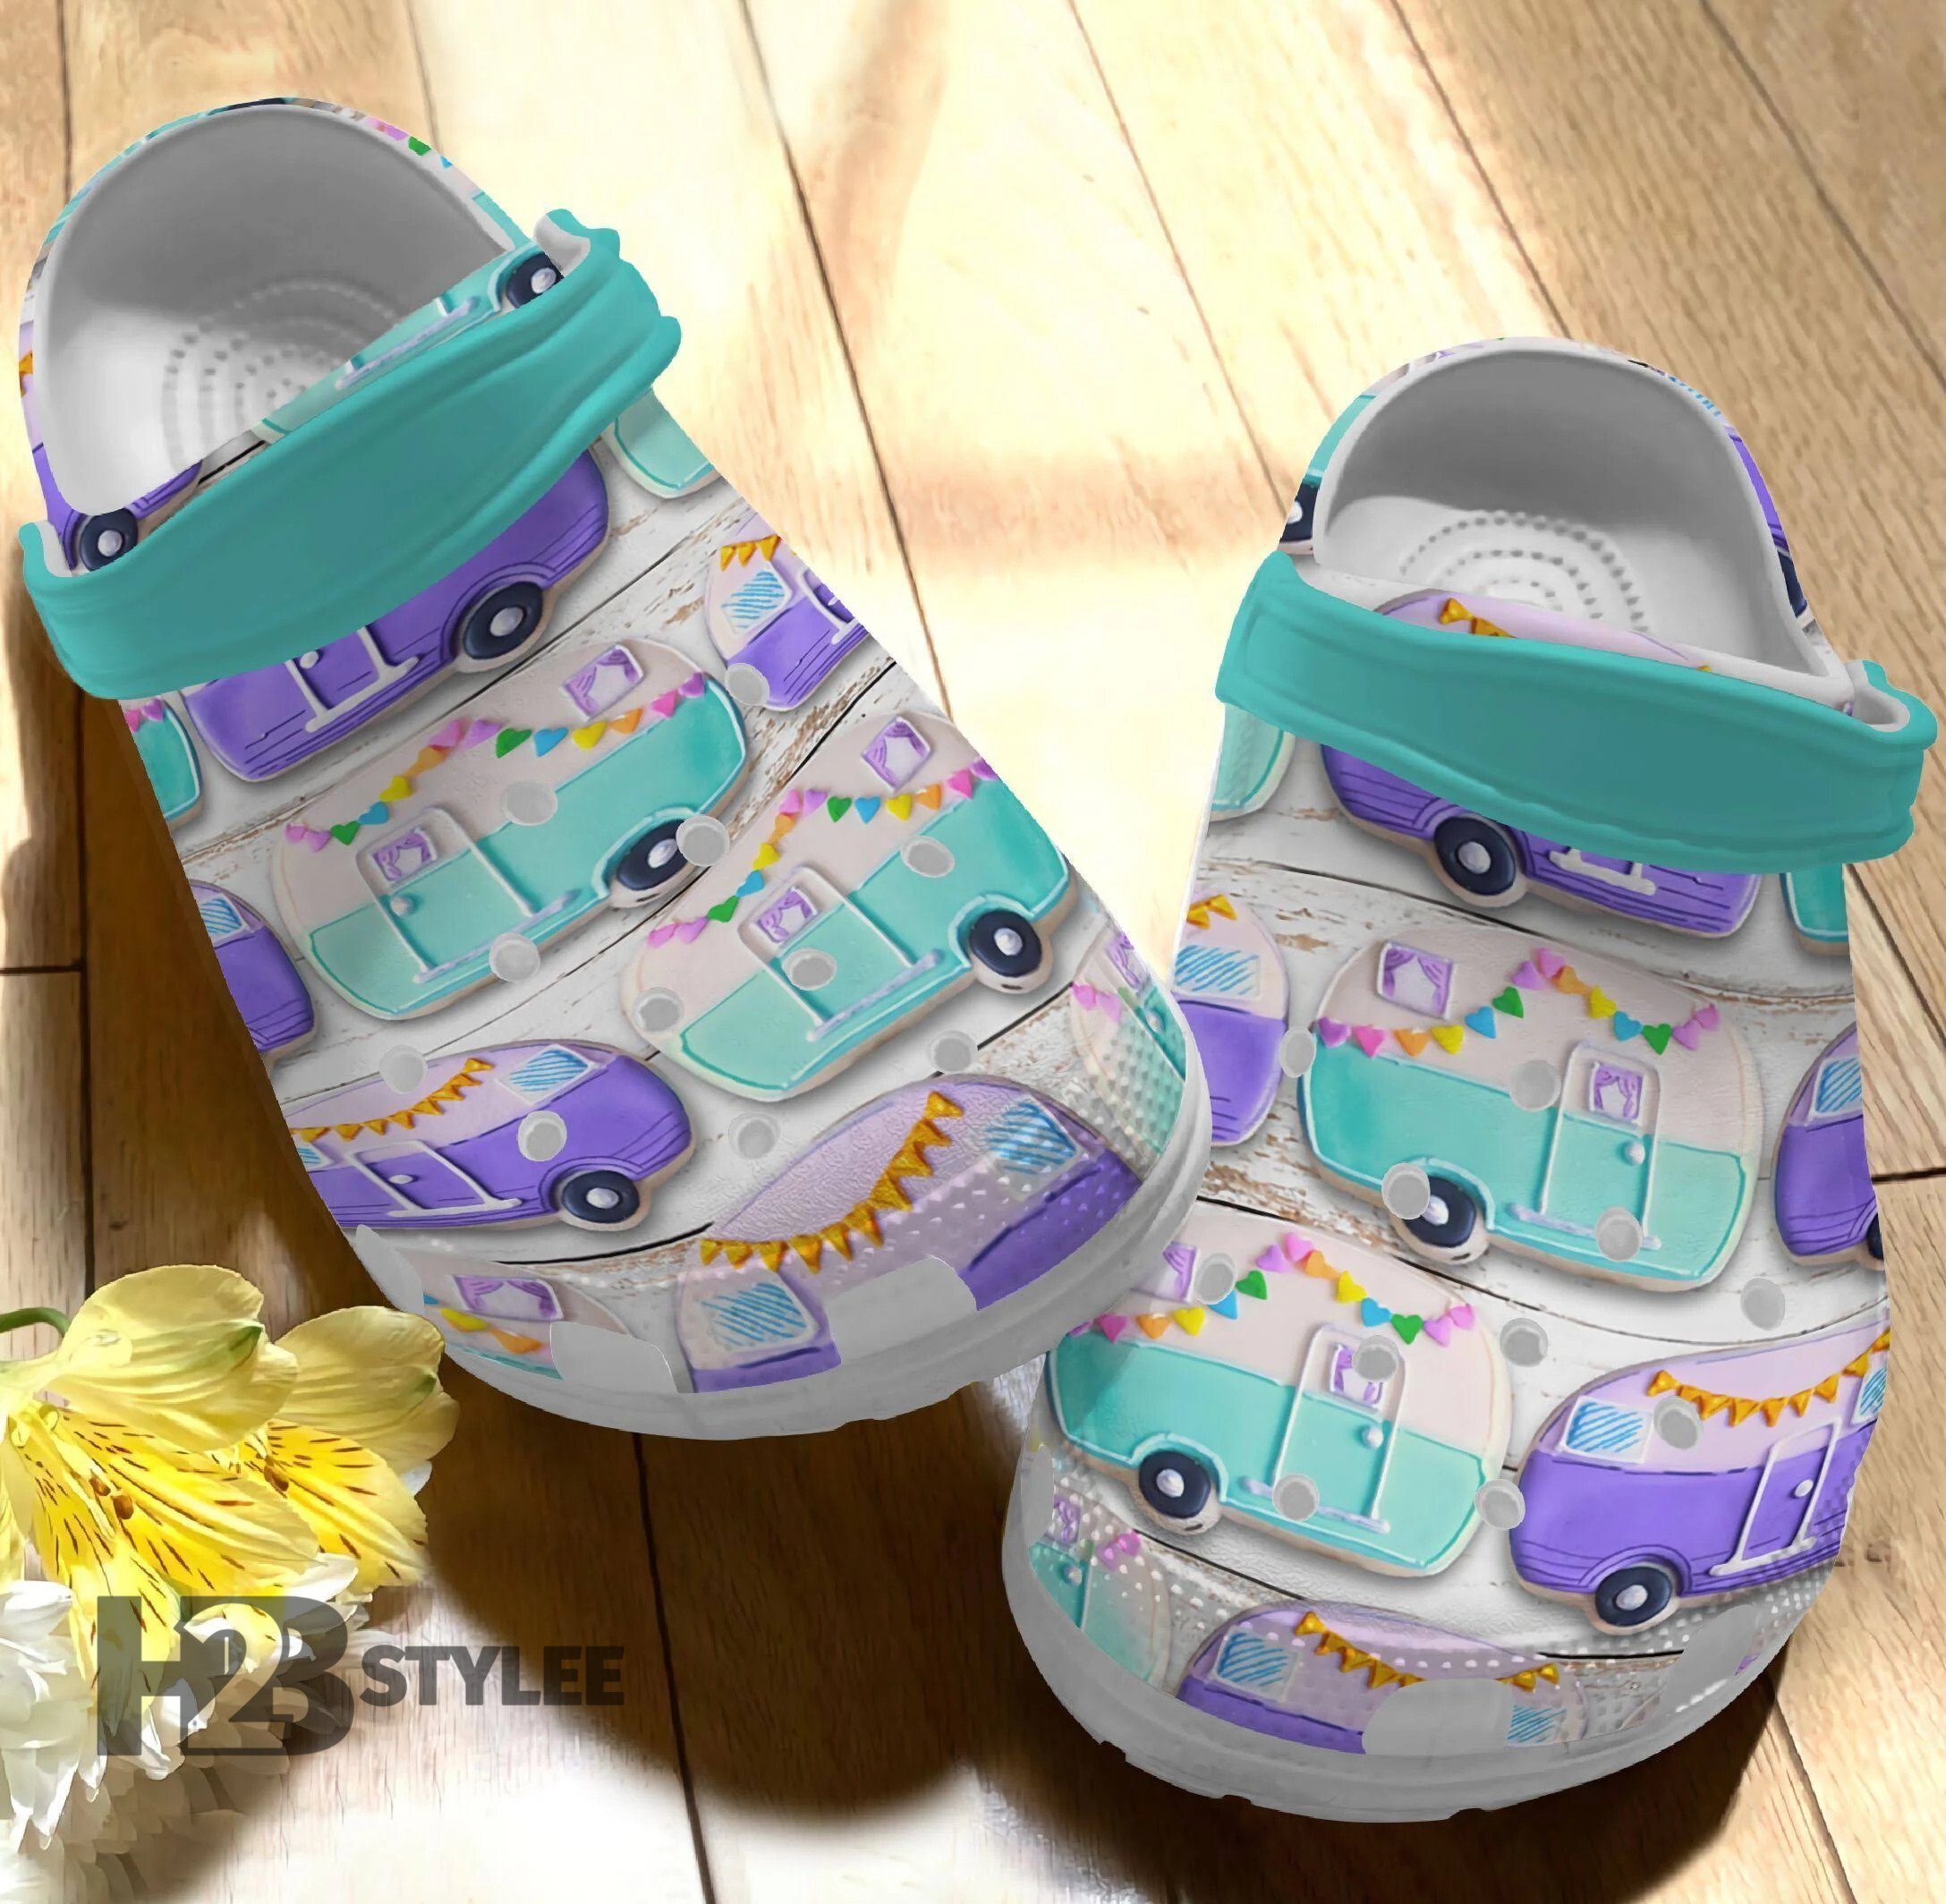 Camping Campfire Campervan Classic Pattern Crocs Classic Clog - H2bStylee